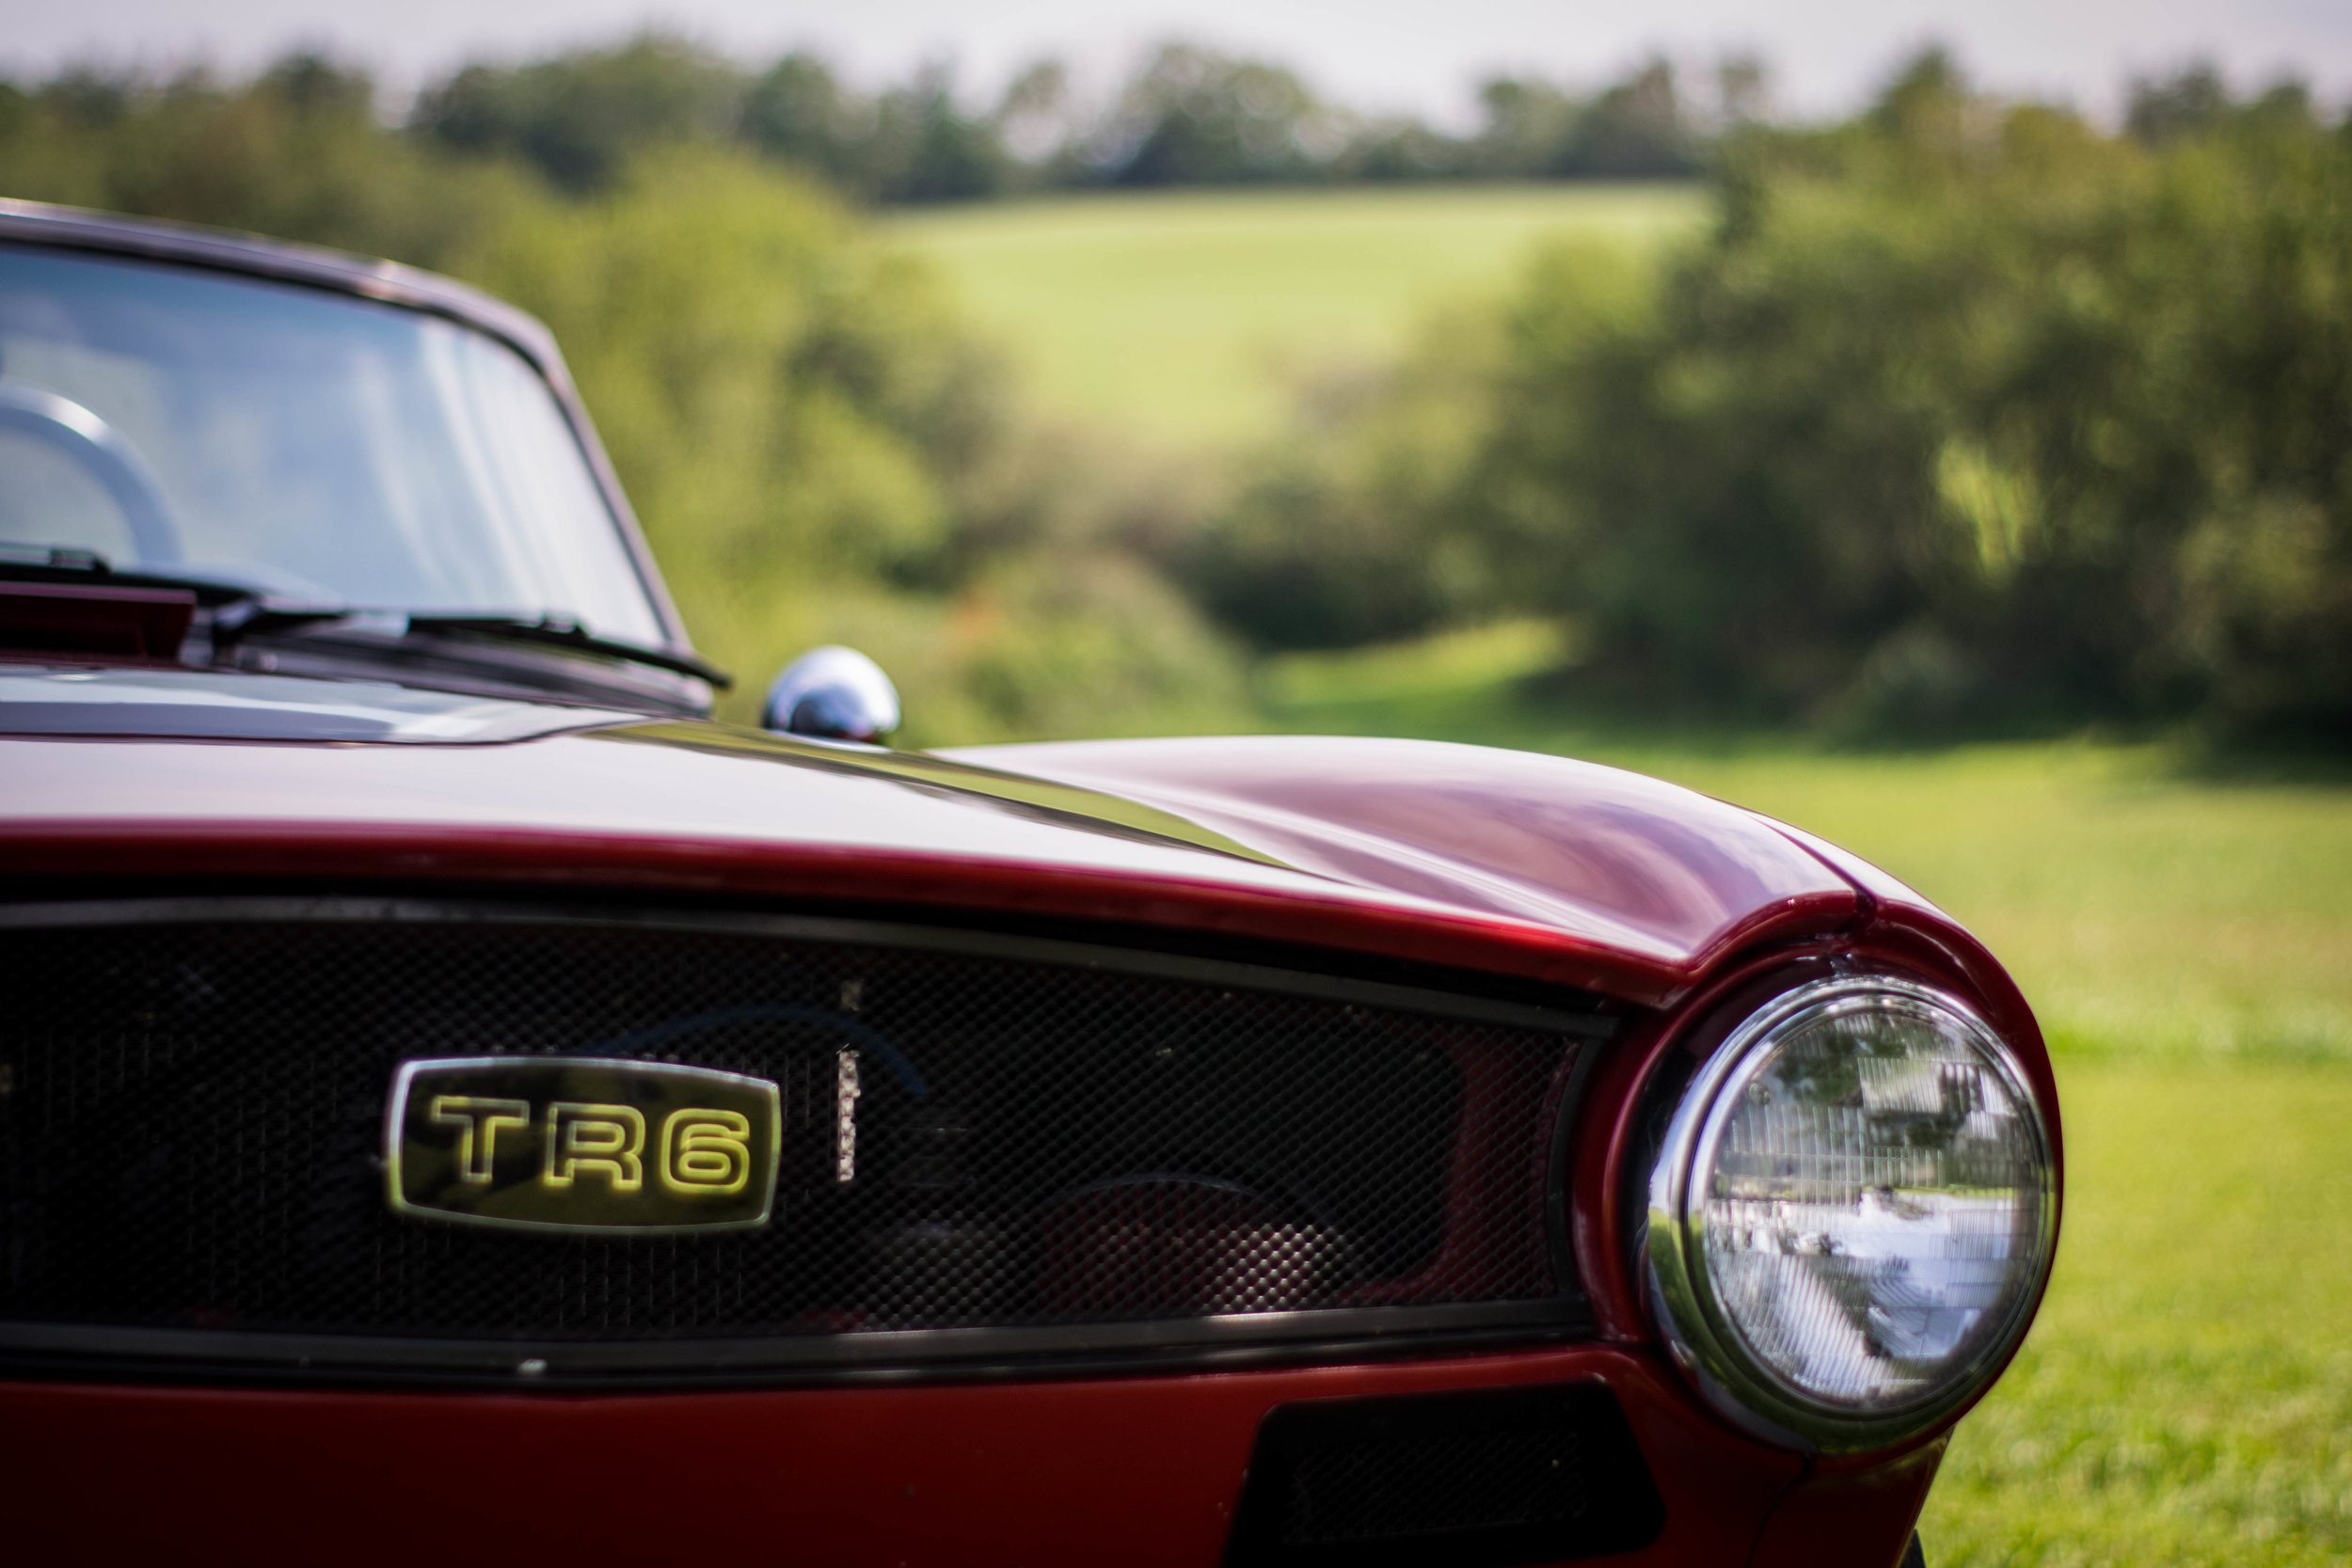  The grille is another one off piece as well. Fabricated from scratch, it holds the factory TR6 emblem, while again, providing a modernized update. We also deleted the massive front turn signals to make an additional pair of air intakes, that just so